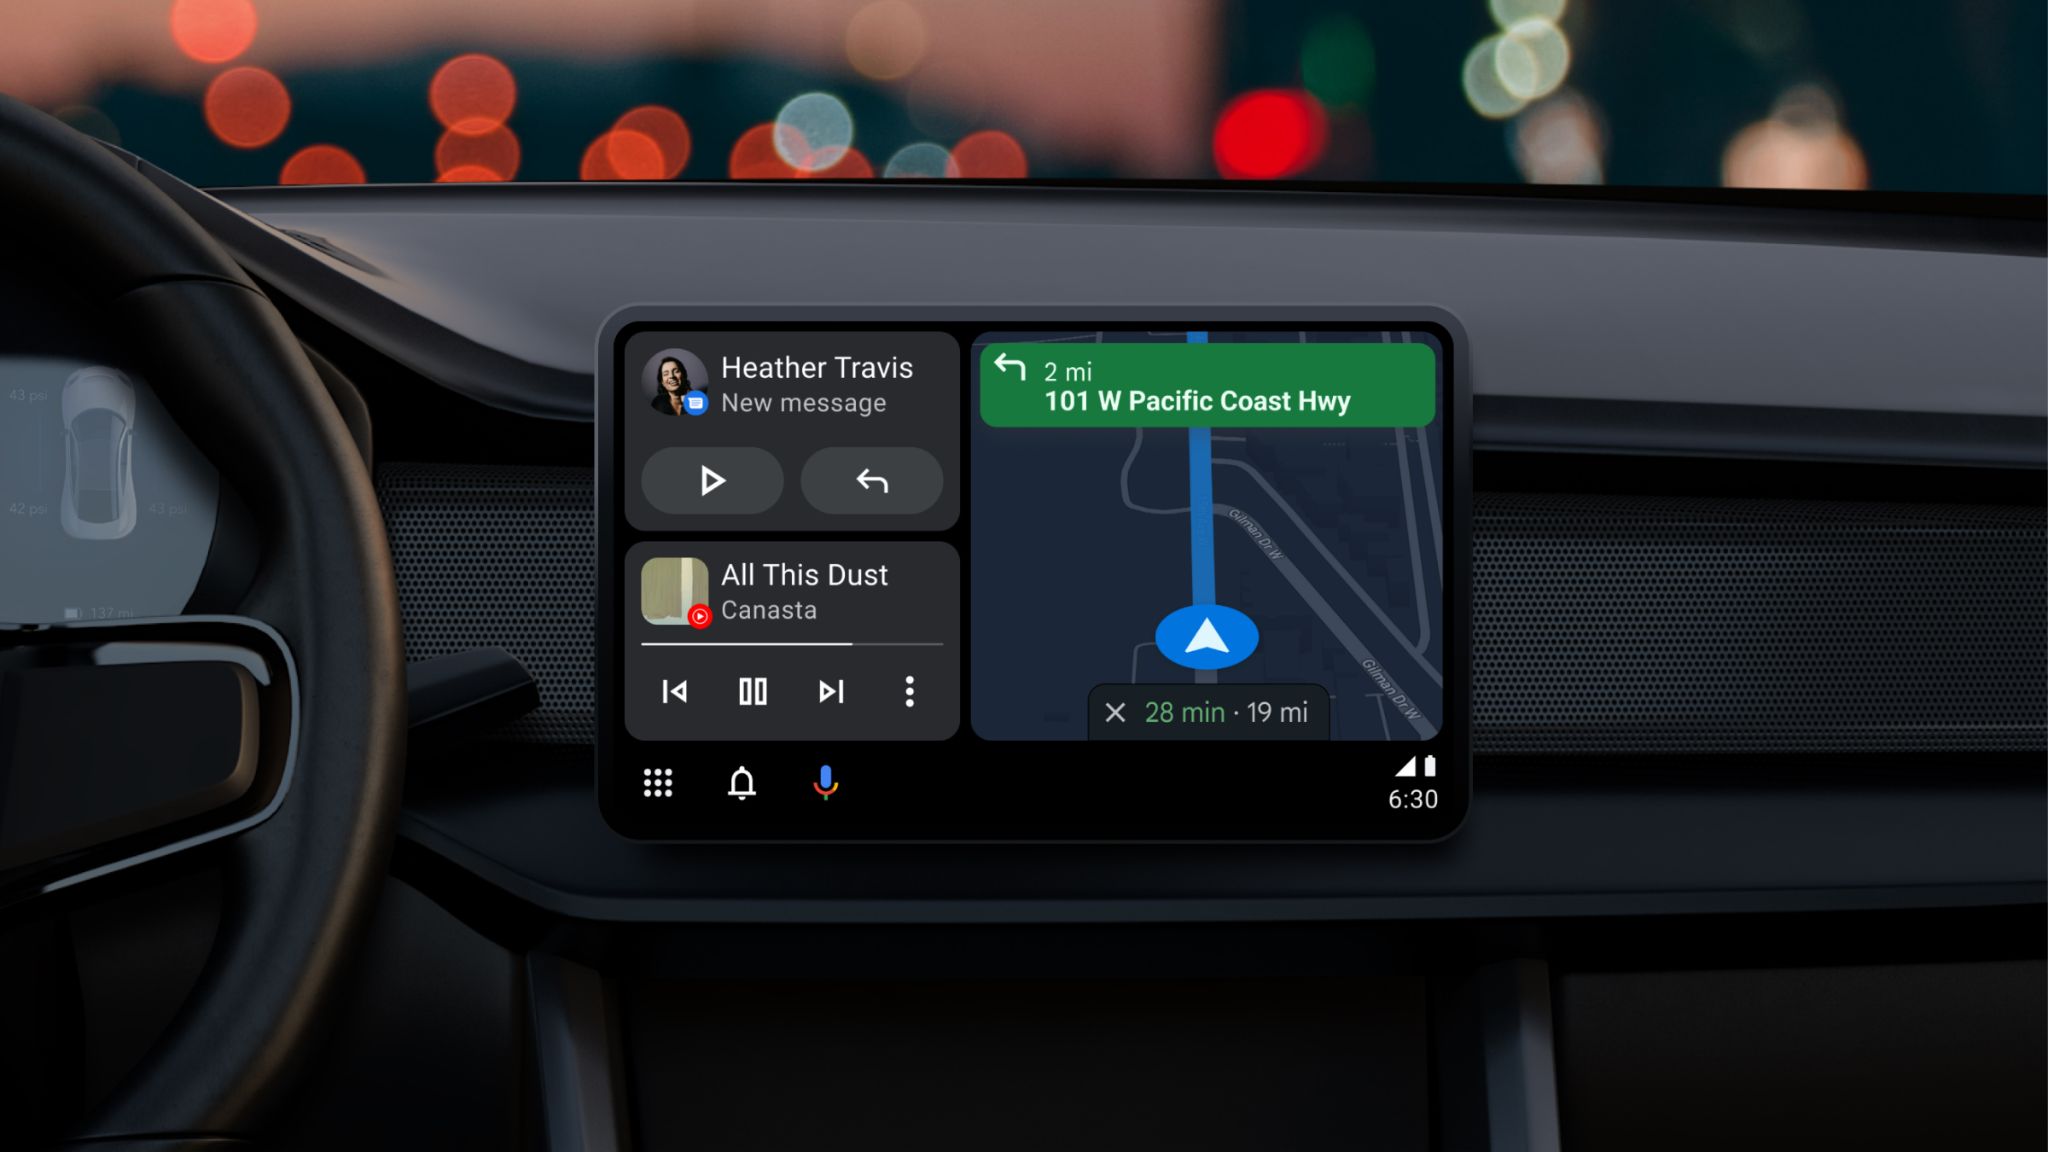 New Android Auto user interface shown on a landscape display on a car's dashboard